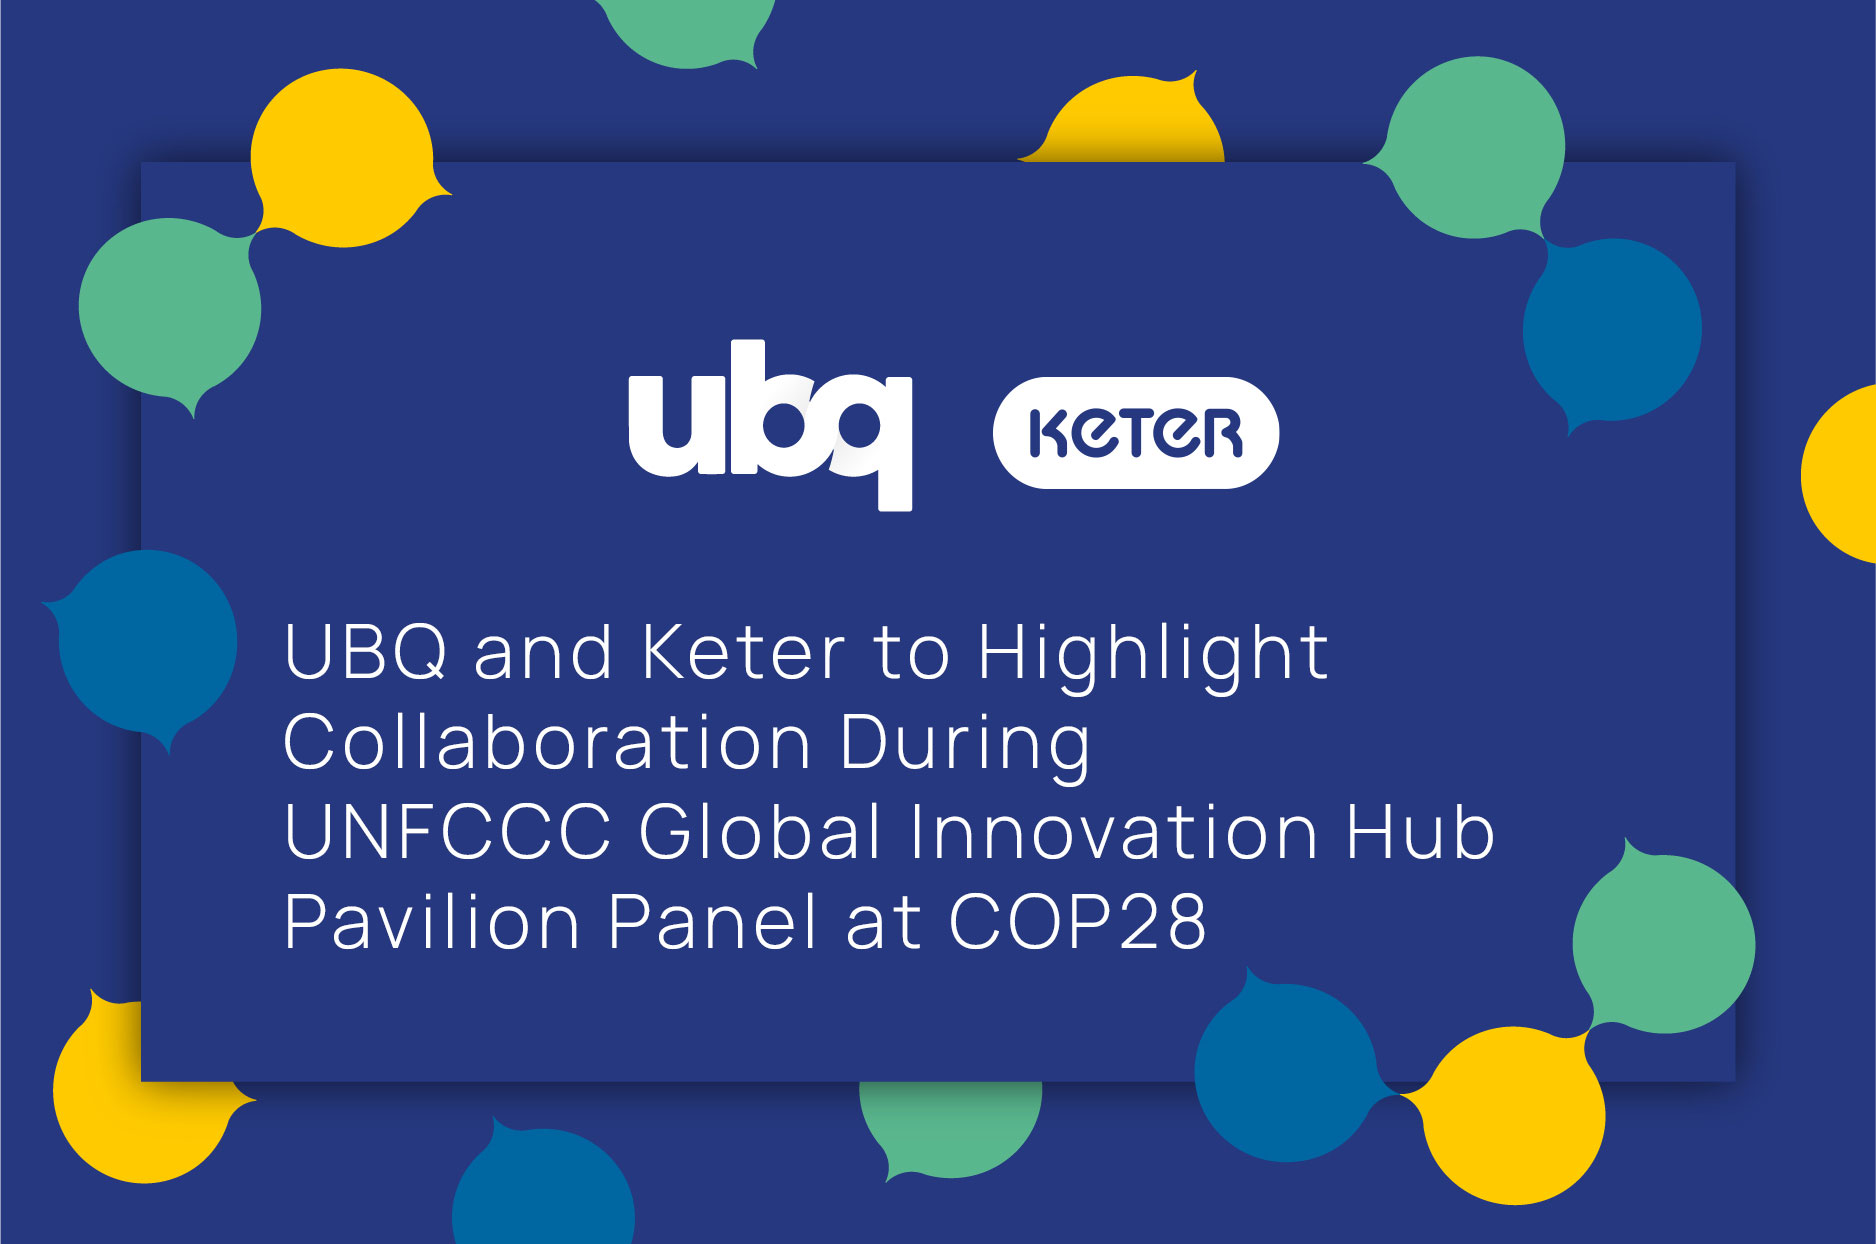 UBQ and Keter collaboration announcement at UNFCC Global Innovation Hub Pavilion Panel at COP28.